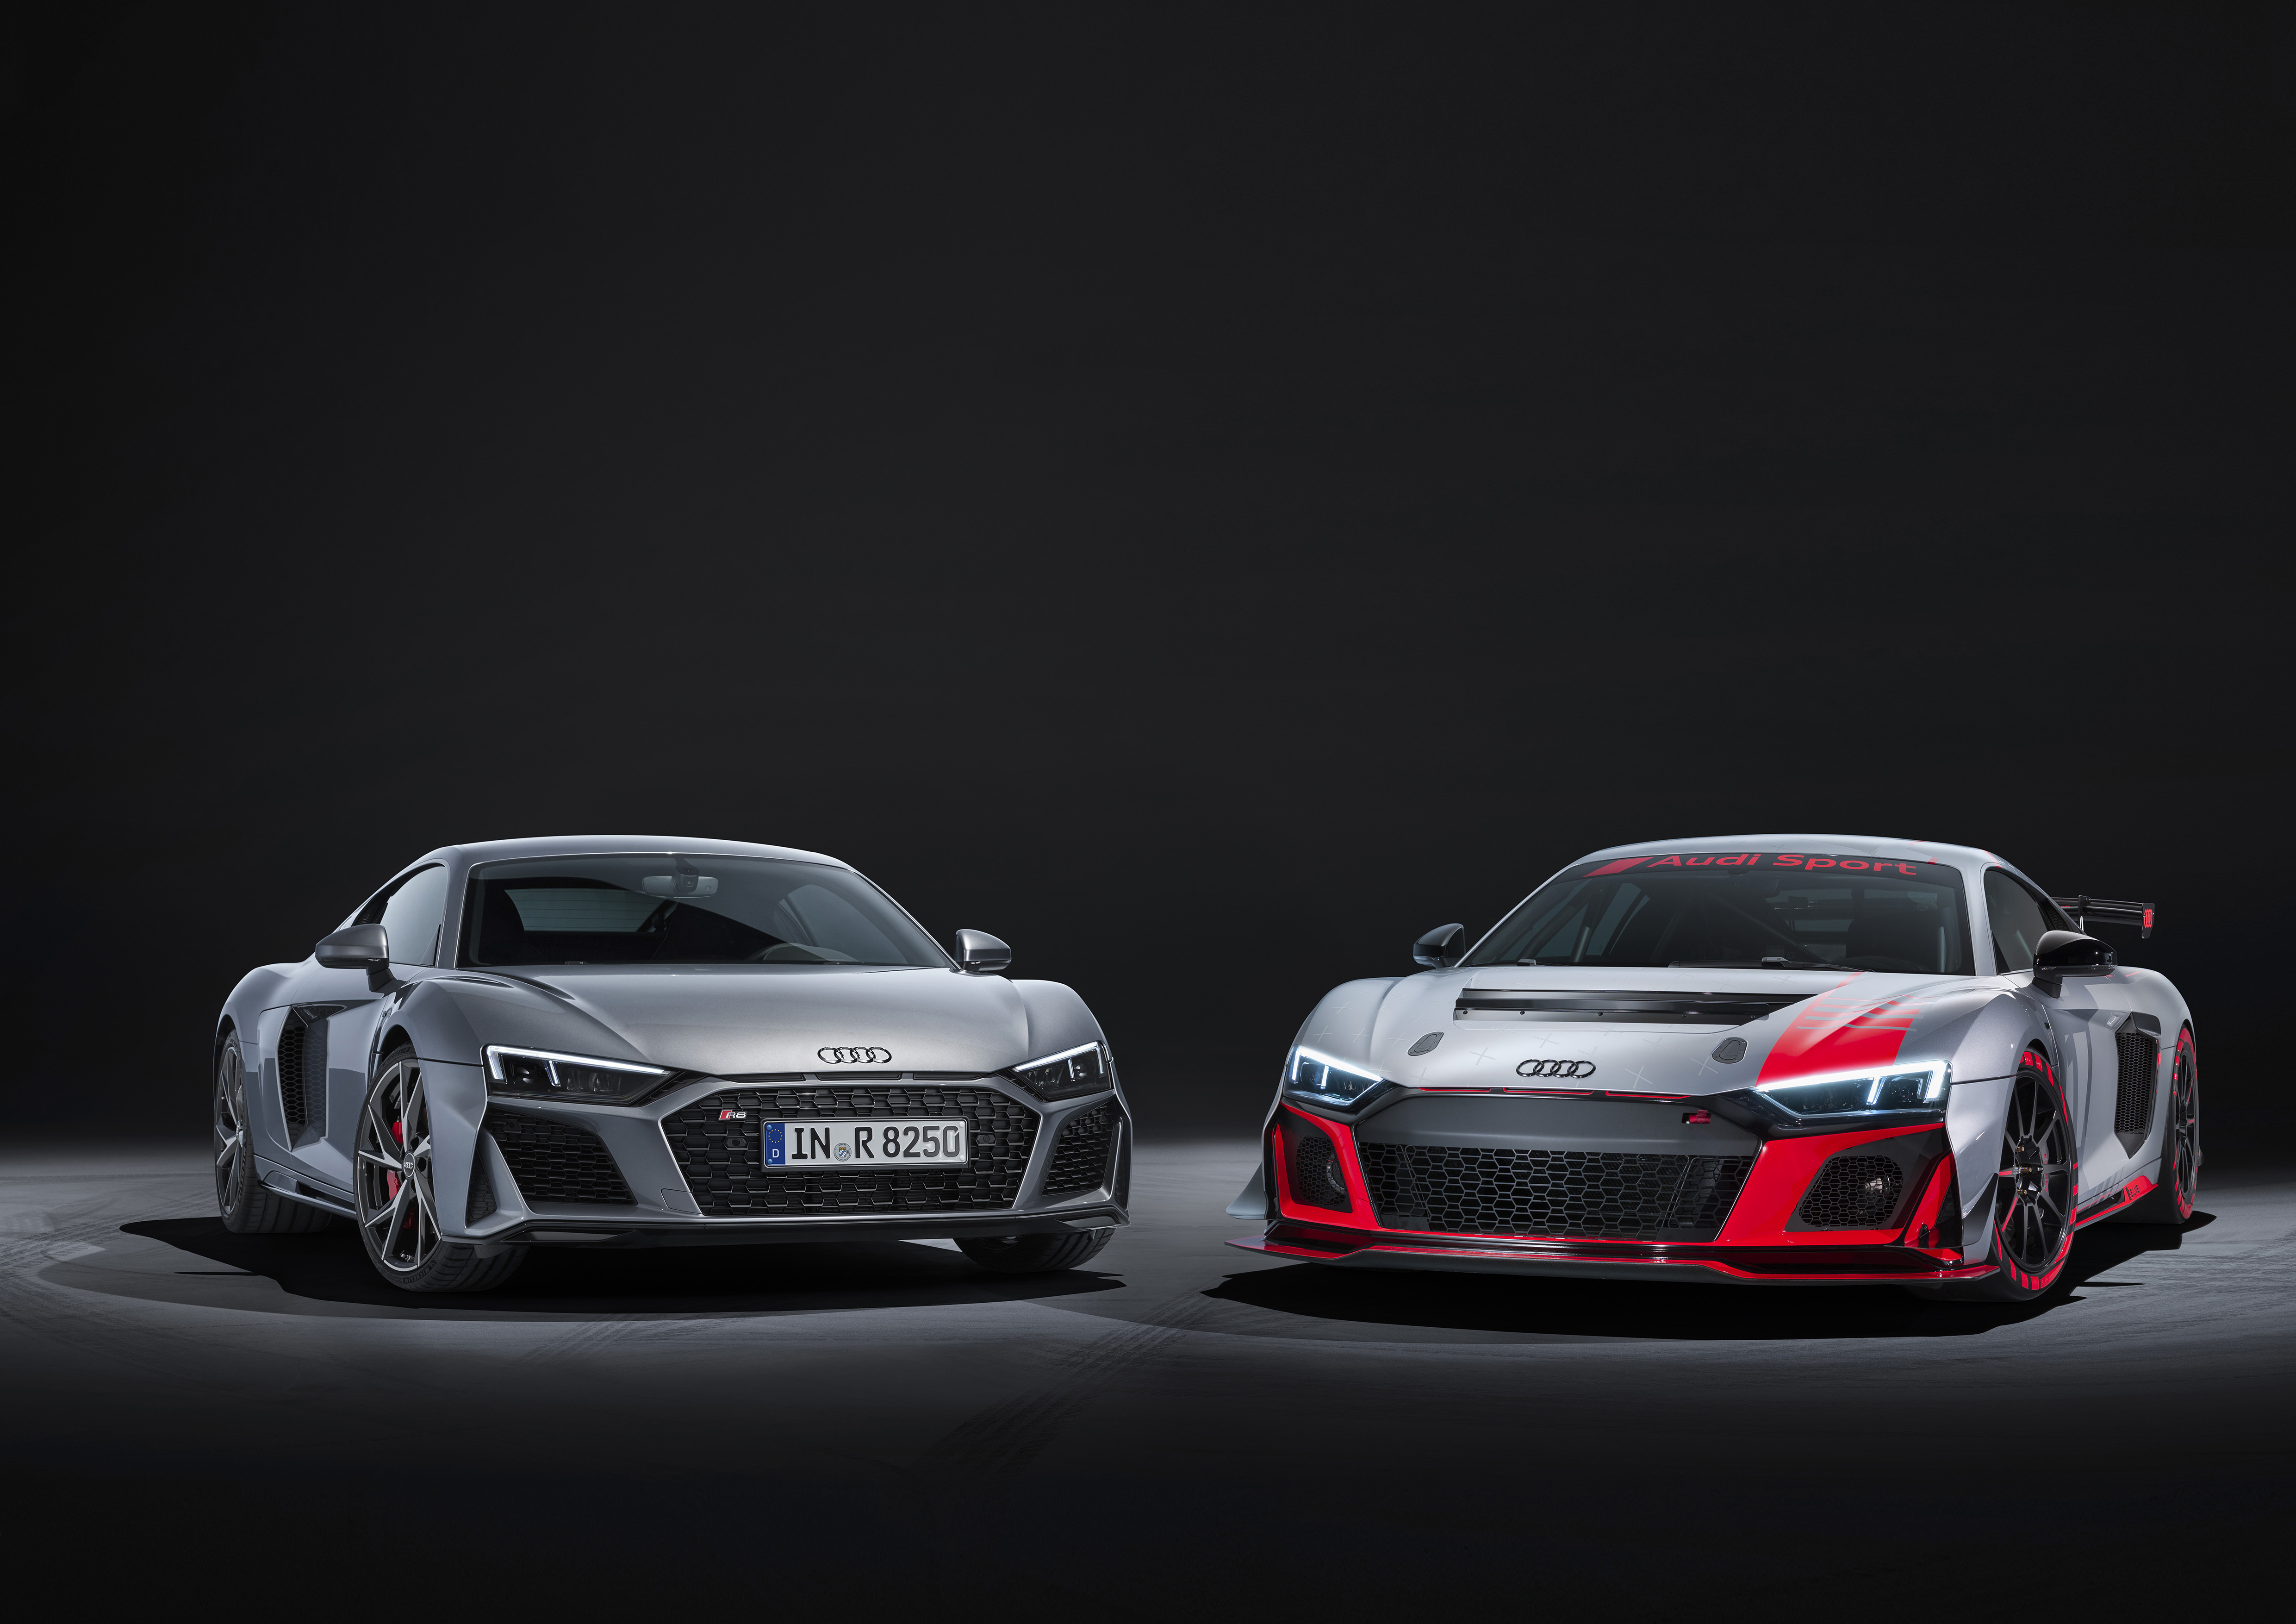 Wallpapers Audi R8 two cars brand on the desktop